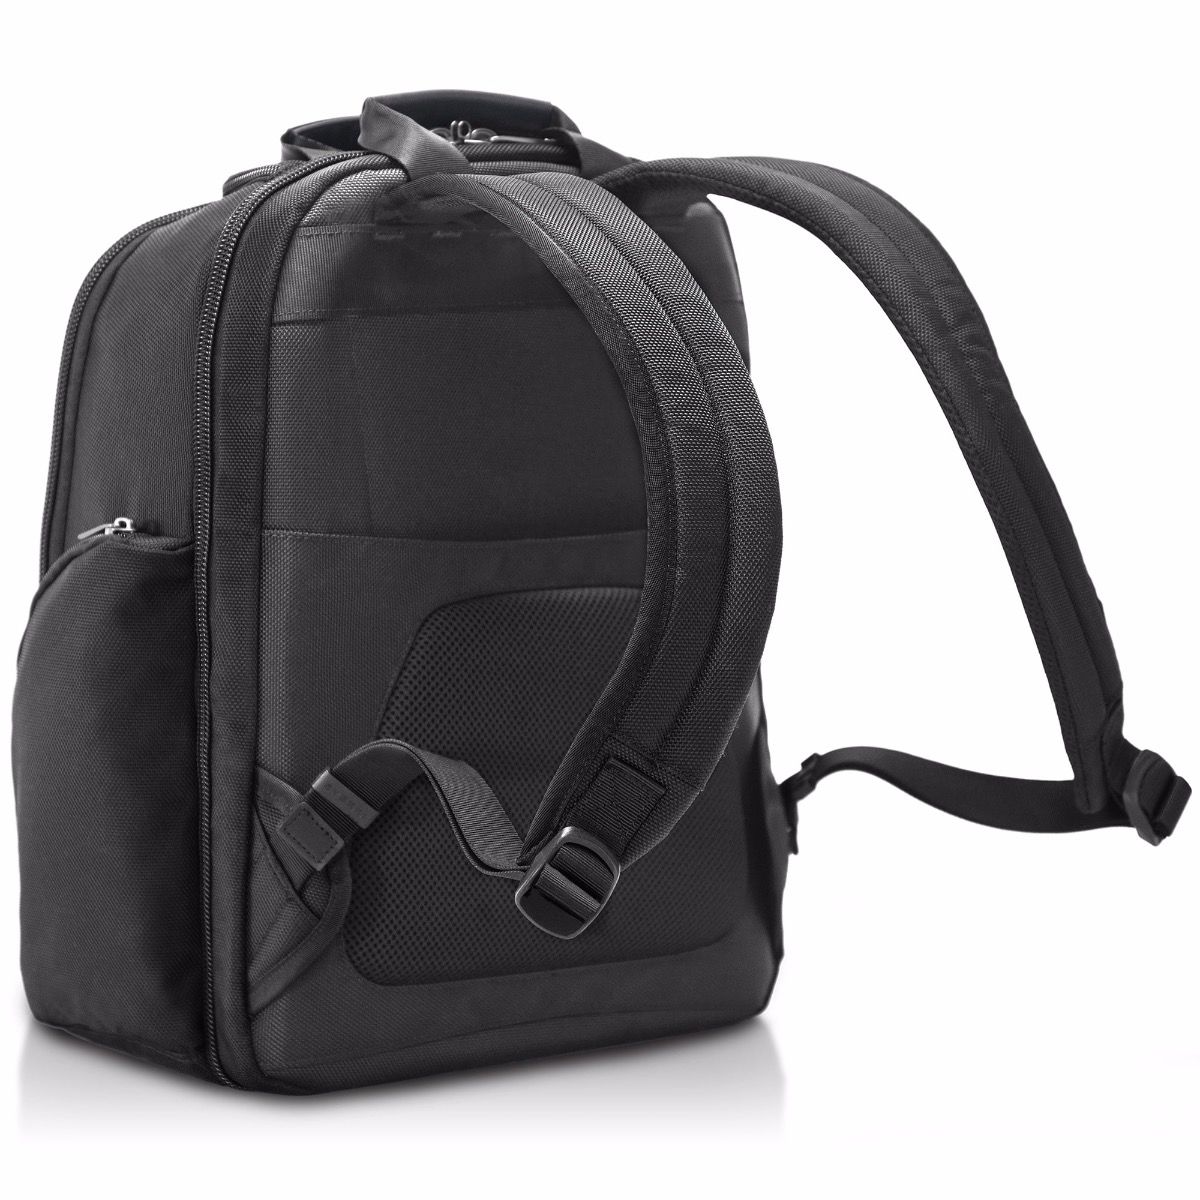 14 inch laptop backpack travel